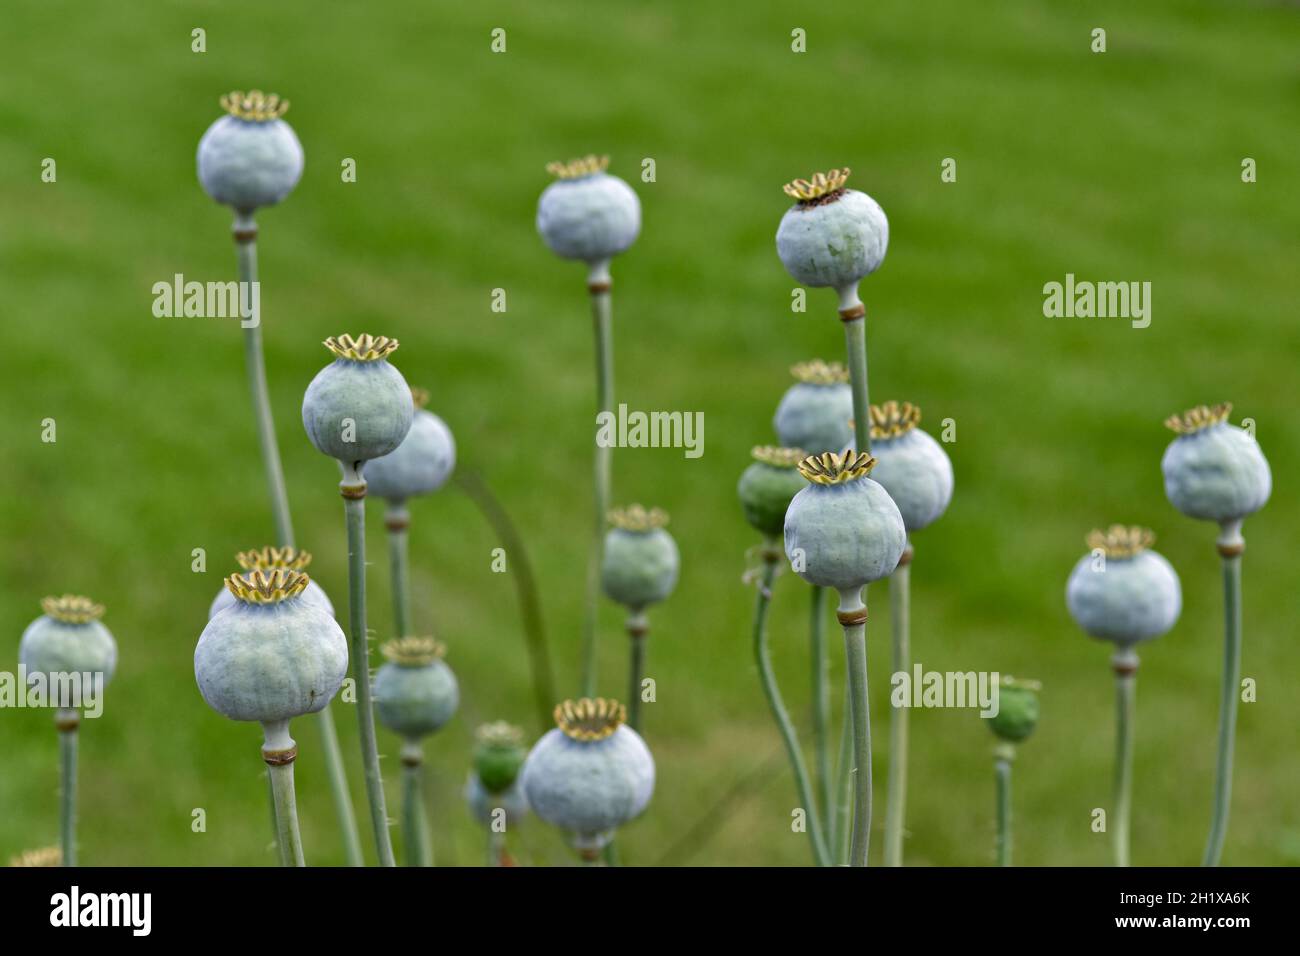 Giant Poppy seed heads with grass in the background, taken with a shallow depth of field Stock Photo